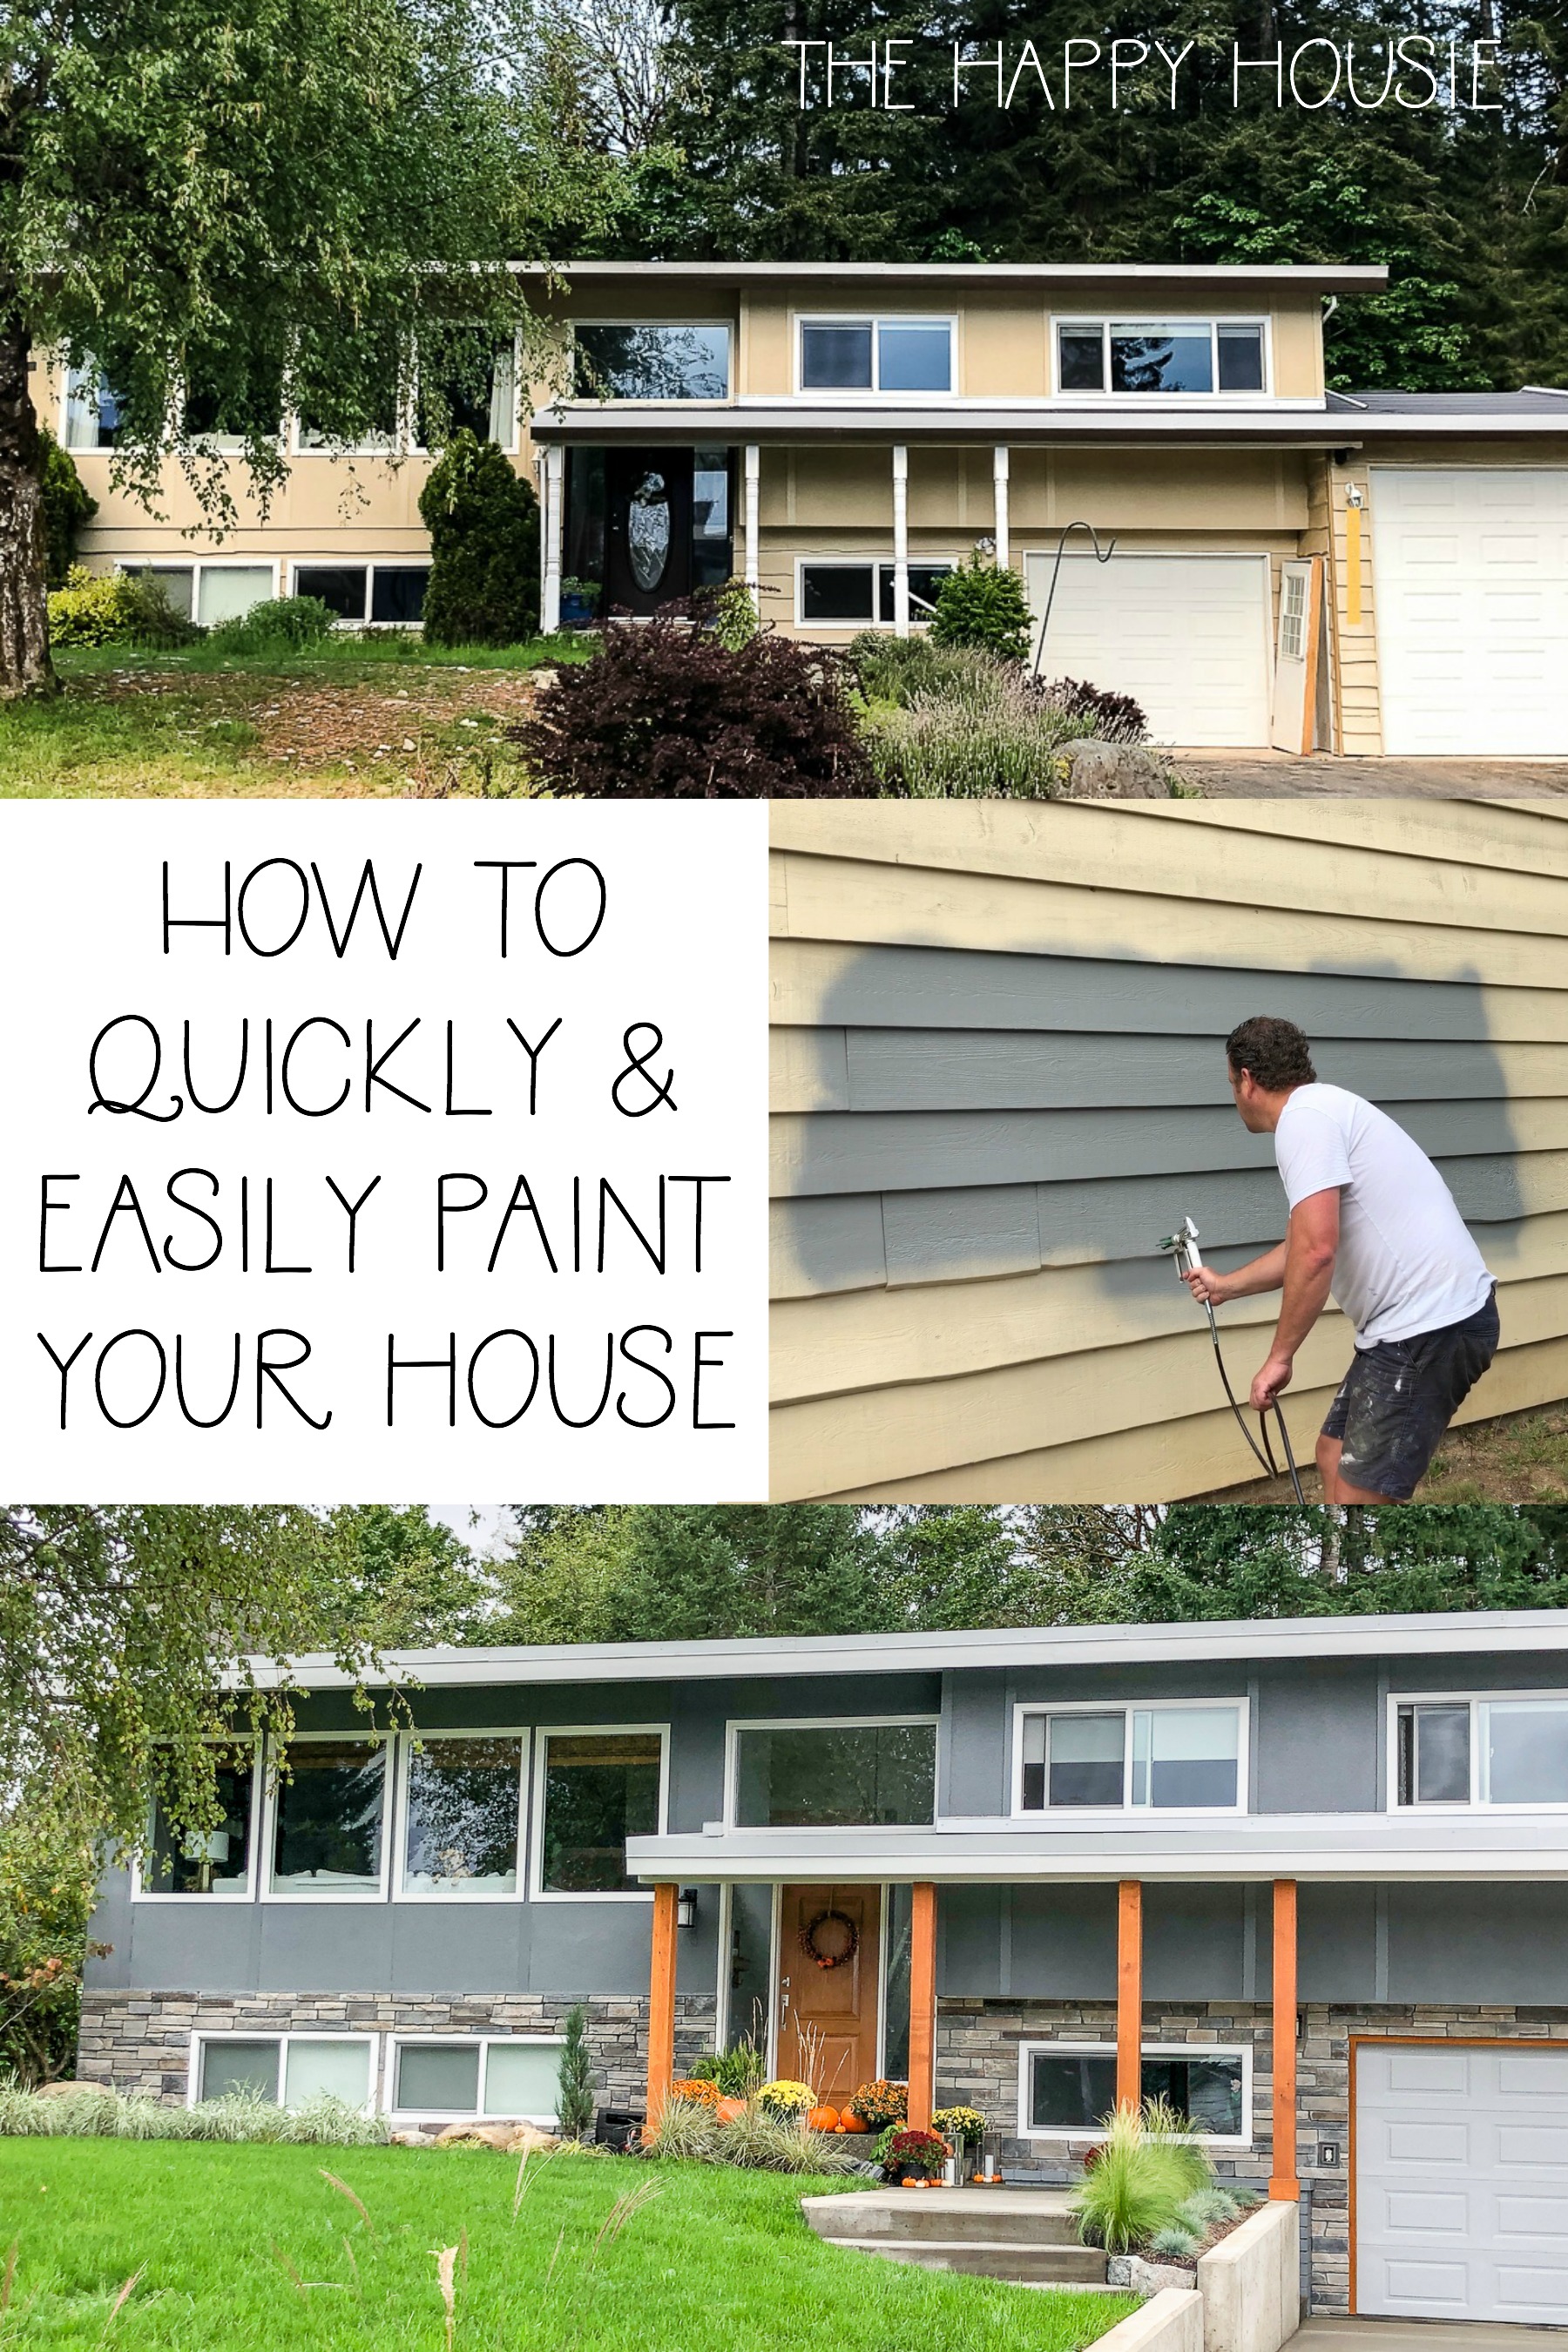 How to quickly and easily paint your house graphic.